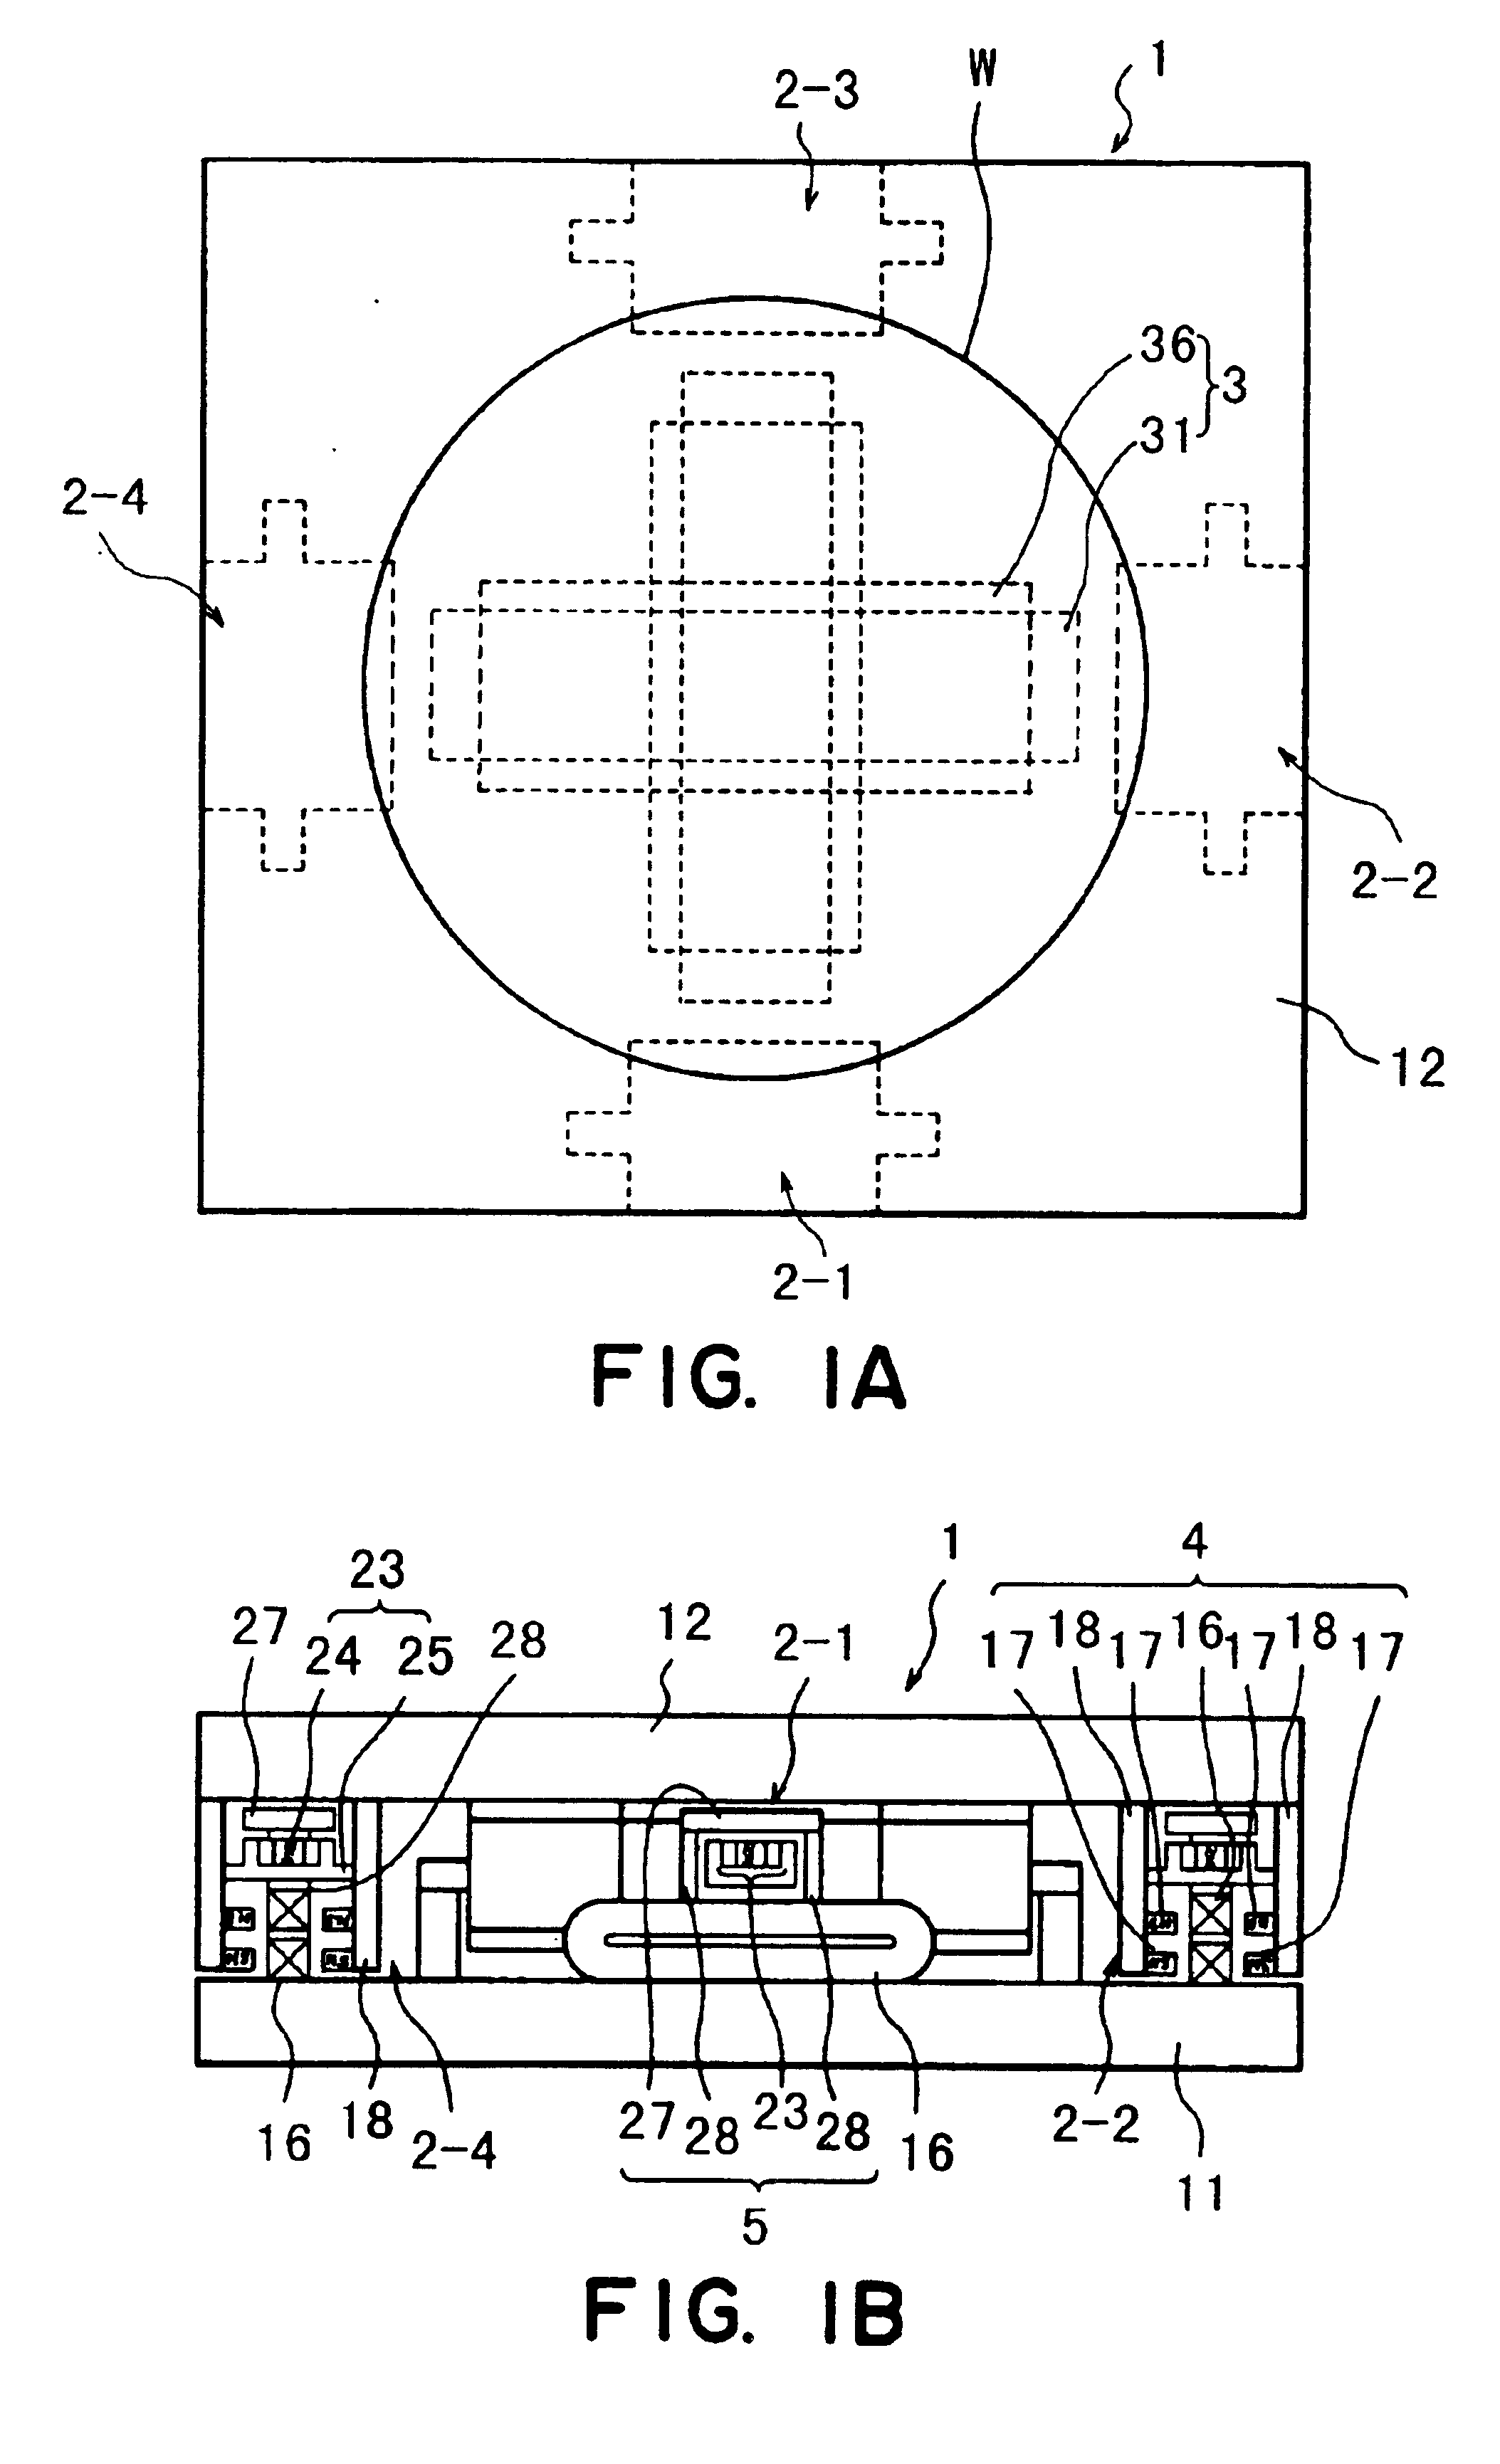 Supporting system in exposure apparatus